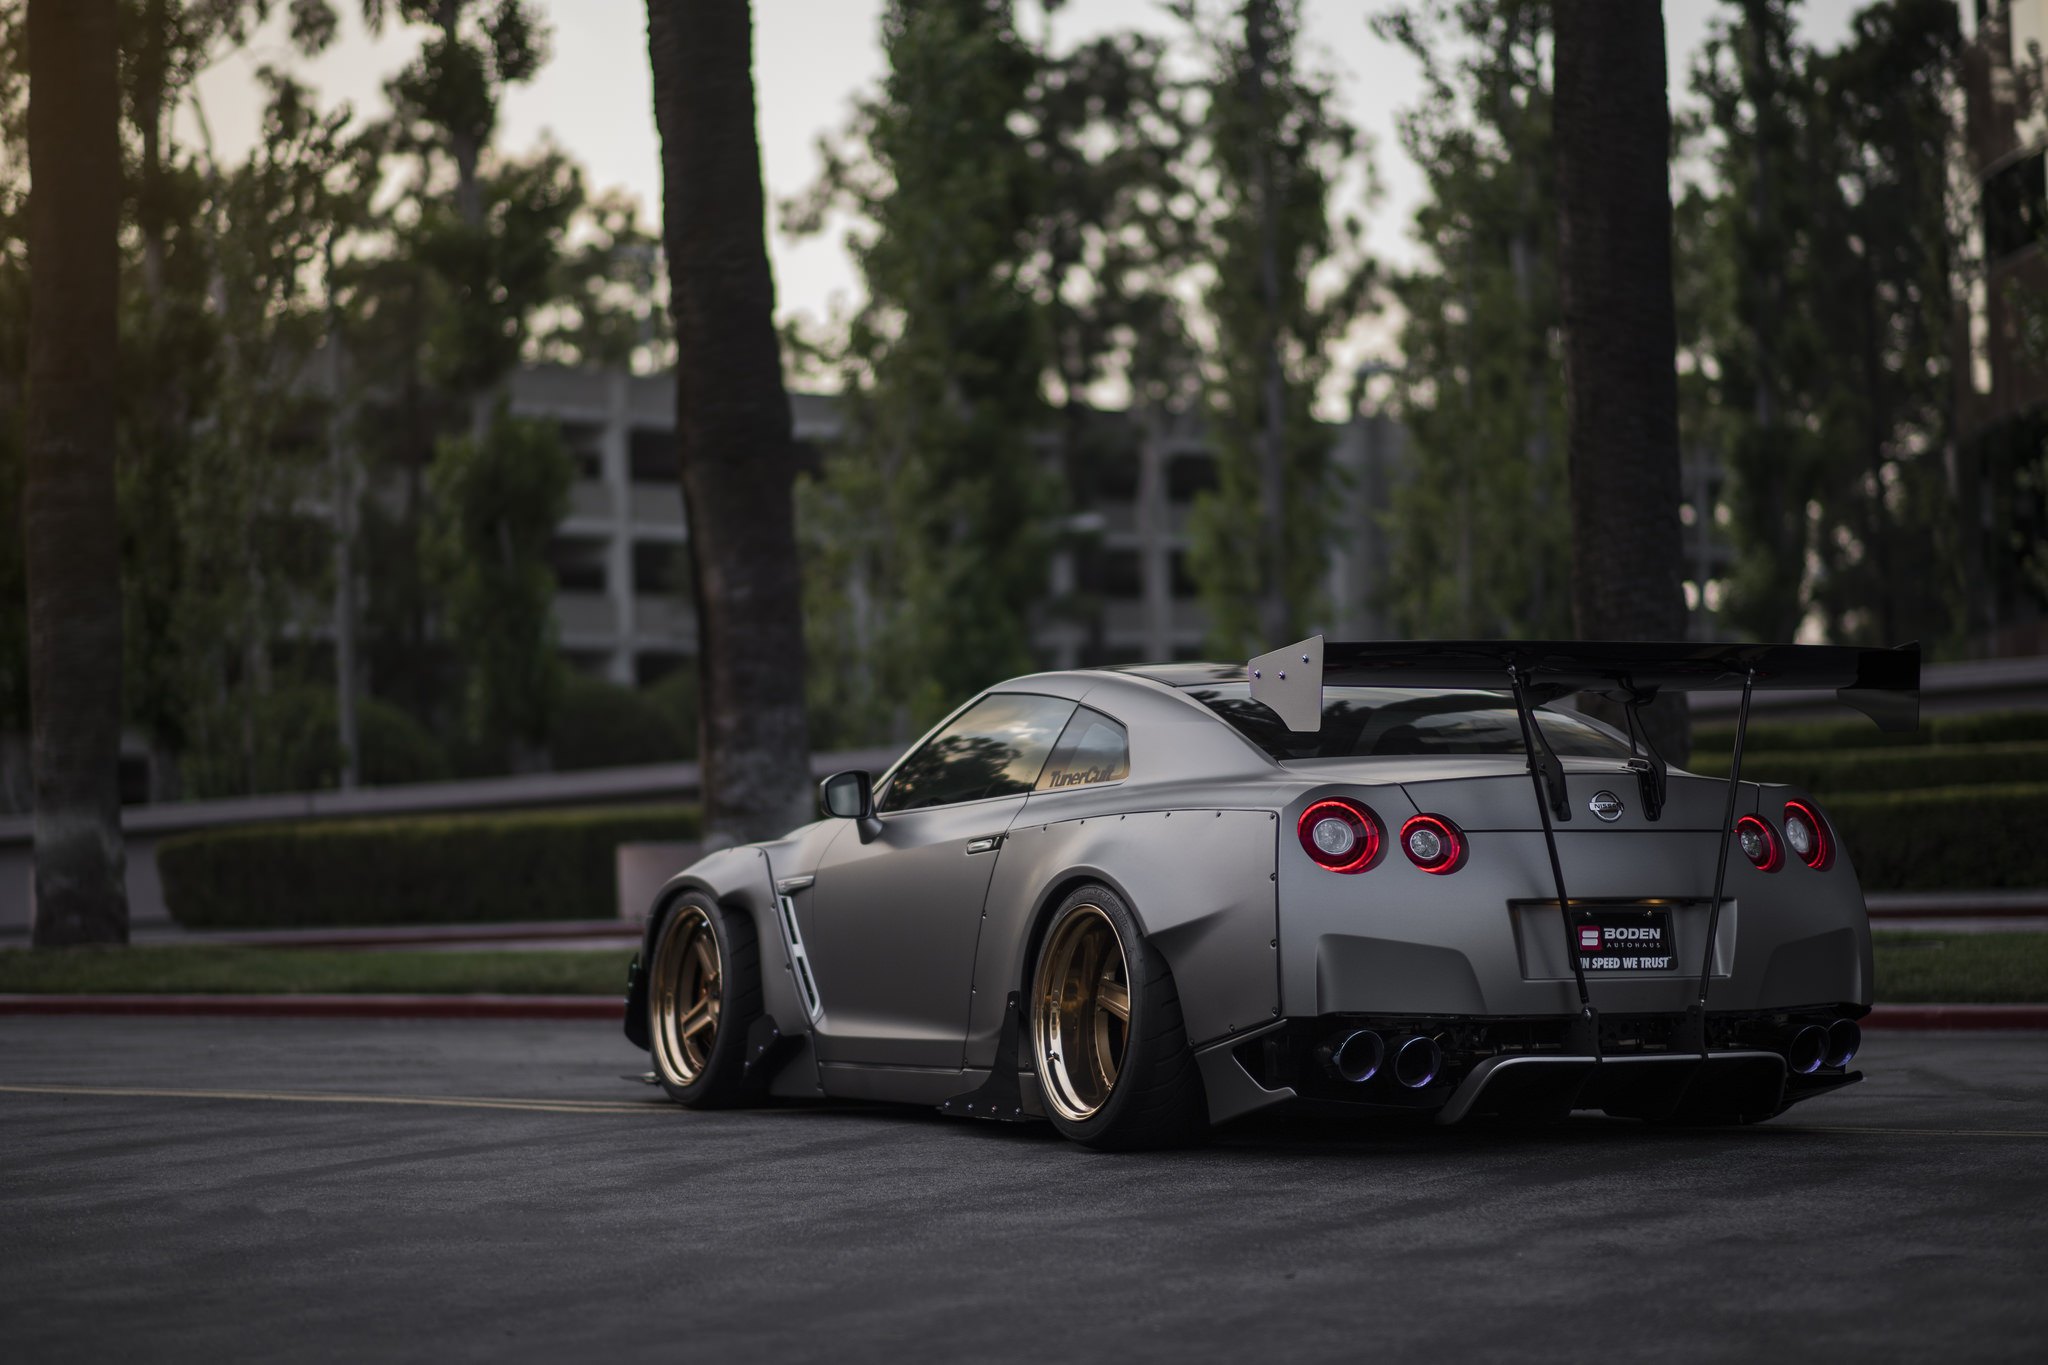 Large Wing Spoiler on Gray Nissan GT-R - Photo by Alex Esperon